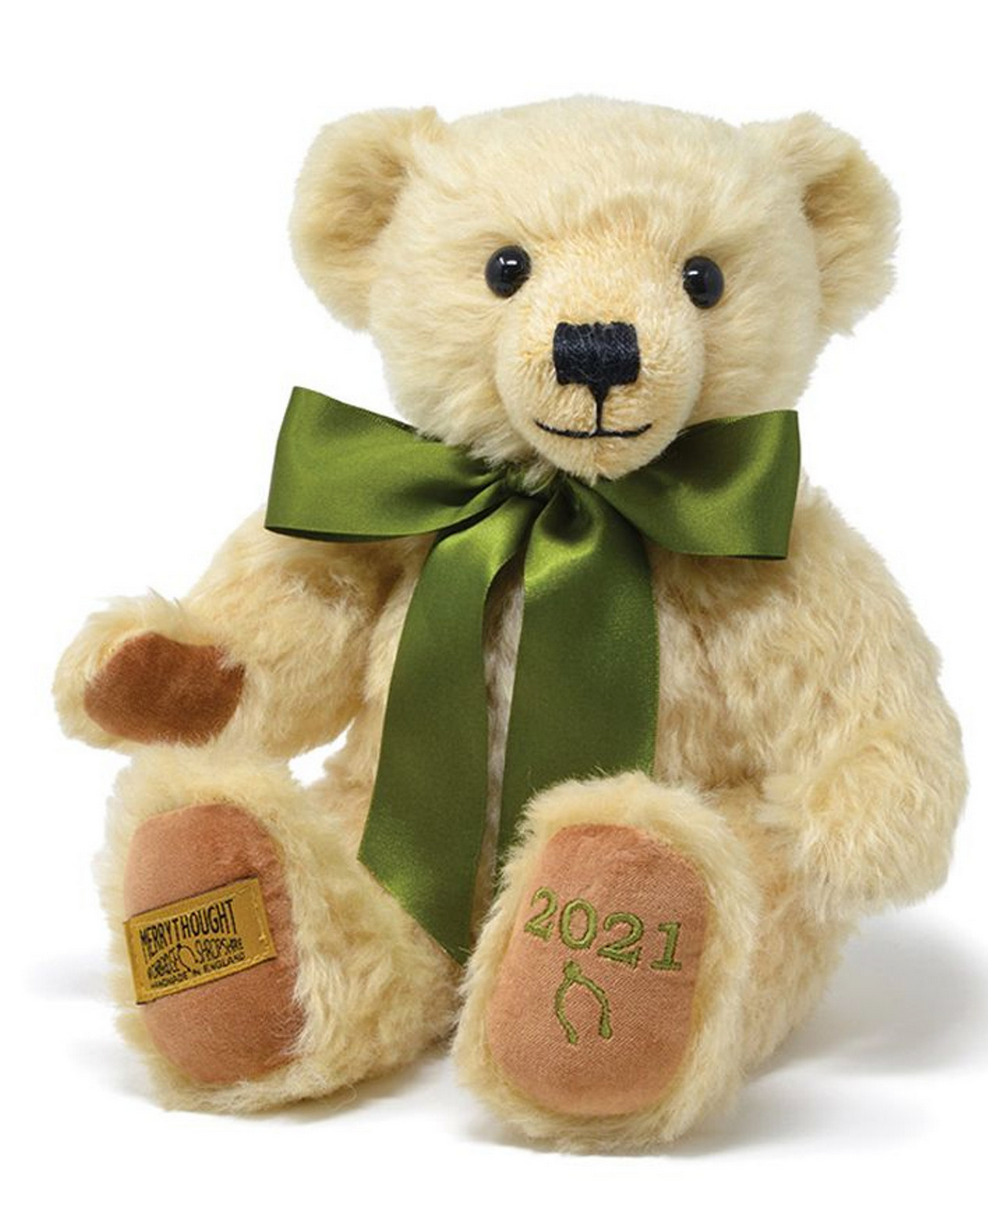 Merrythought Mohair Year Bear of 2021 - 12” Brand New - Only 200 Made!